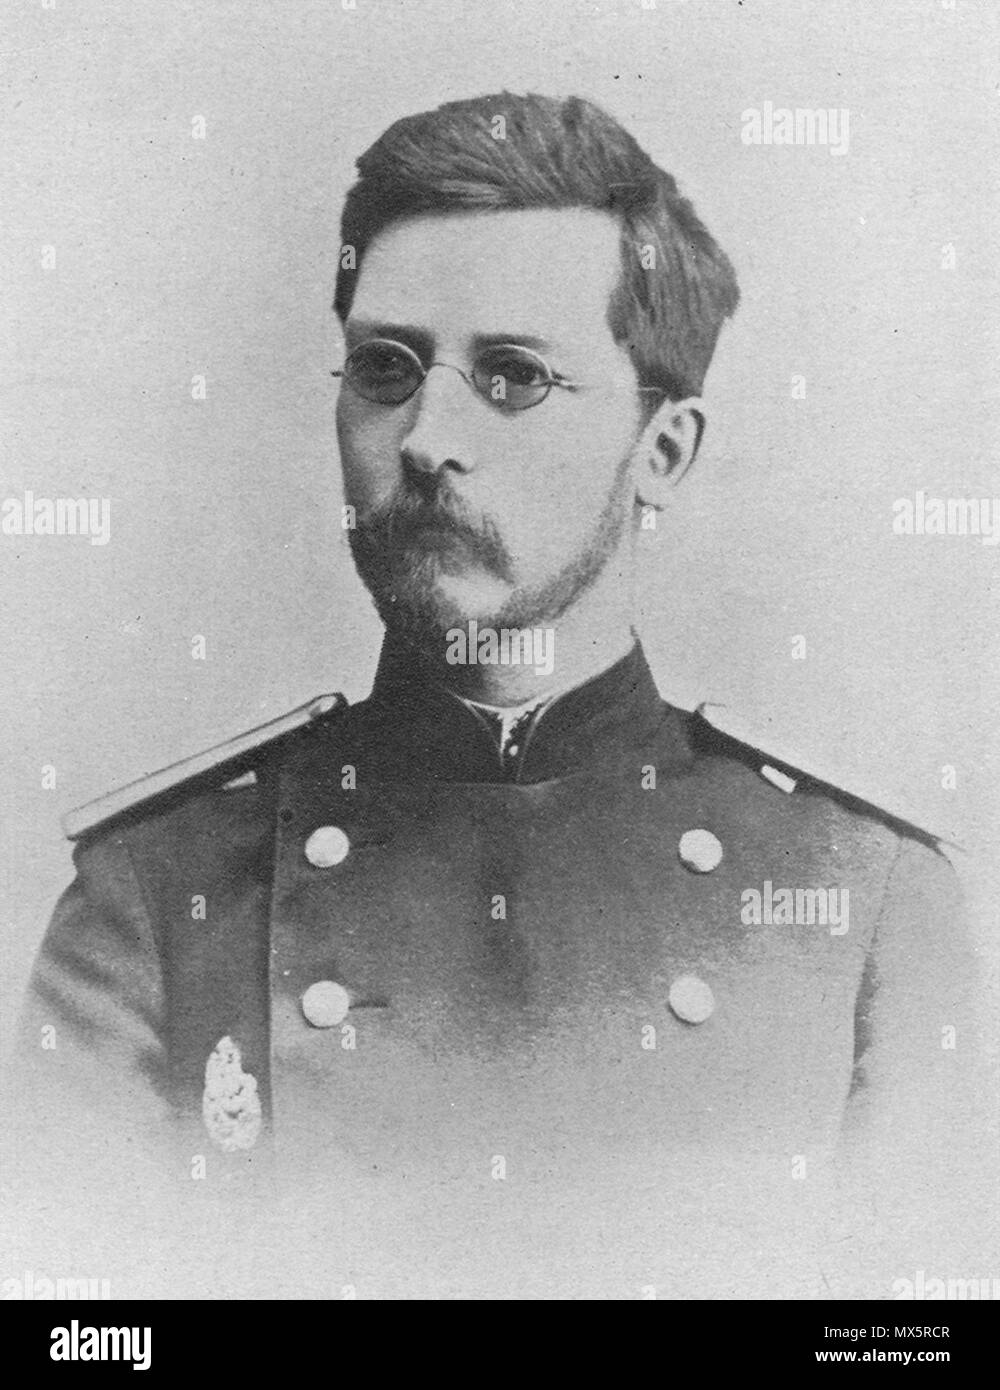 . English: «The accompanying portrait (Frontispiece), taken in 1895, represents BOROVSKY — wearing the uniform of a medical officer in the Imperial Russian Army — at the age of 32, at the period when his researches on oriental sore were being conducted. The original portrait was given to the late Prof. G. H. F. NUTTALL, F.R.S., by Prof. E. N. PAWLOWSKY, of the Military Medical Academy, Leningrad, for inclusion in the ' Portrait Gallery ' of parasitologists at the Molteno Institute, Cambridge, and has been kindly placed at my disposal by Prof. D. KEILIN, F.R.S.»[1] Русский: Фотопортрет П. Ф. Бо Stock Photo